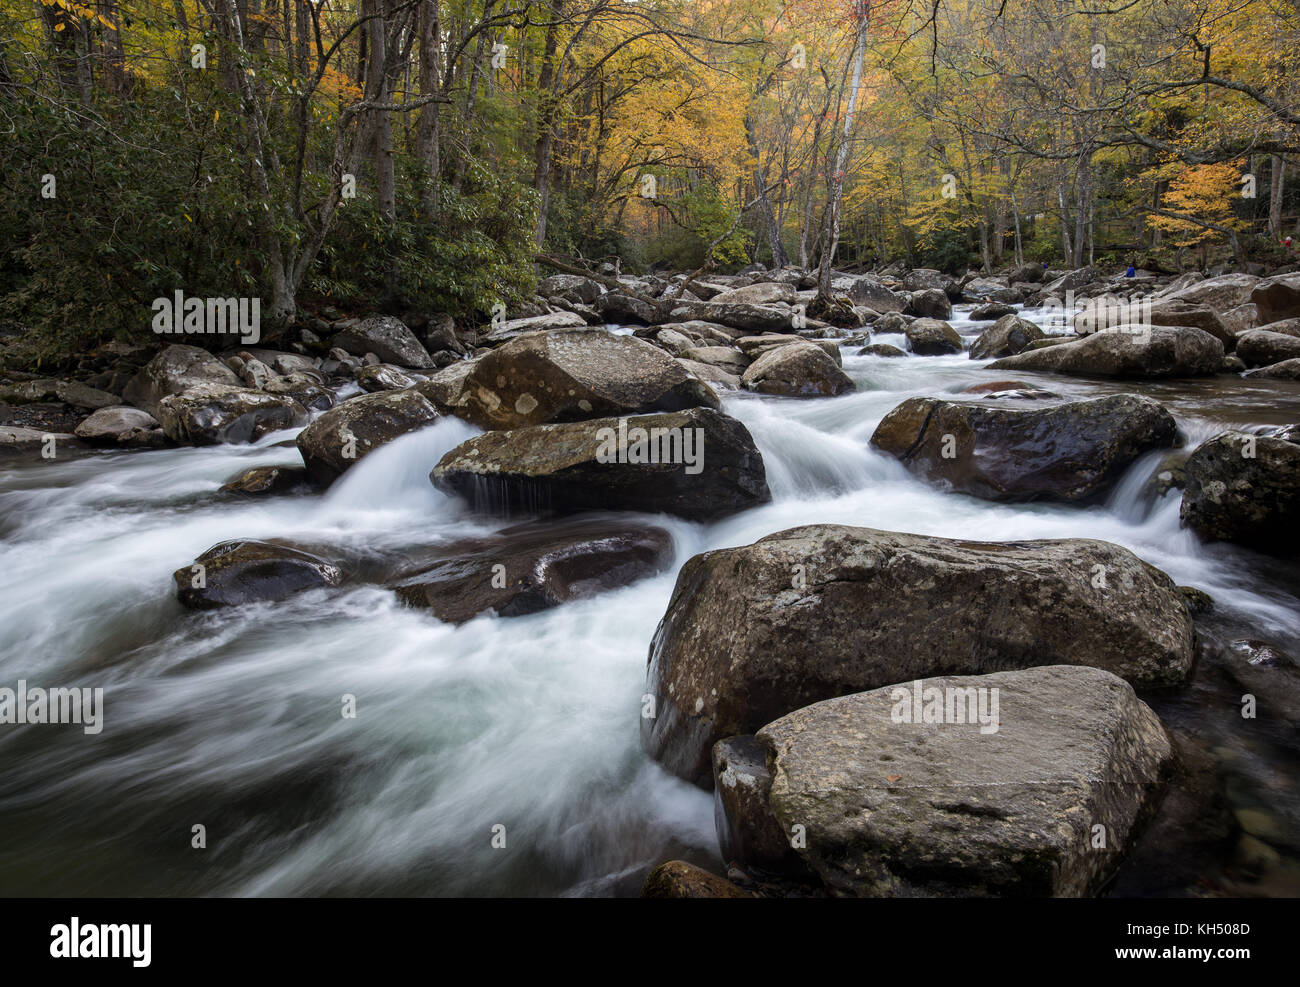 Fall morning scene along the West Prong Little Pigeon River at the Chimneys Picnic Area in Great Smoky Mountain National Park. Stock Photo